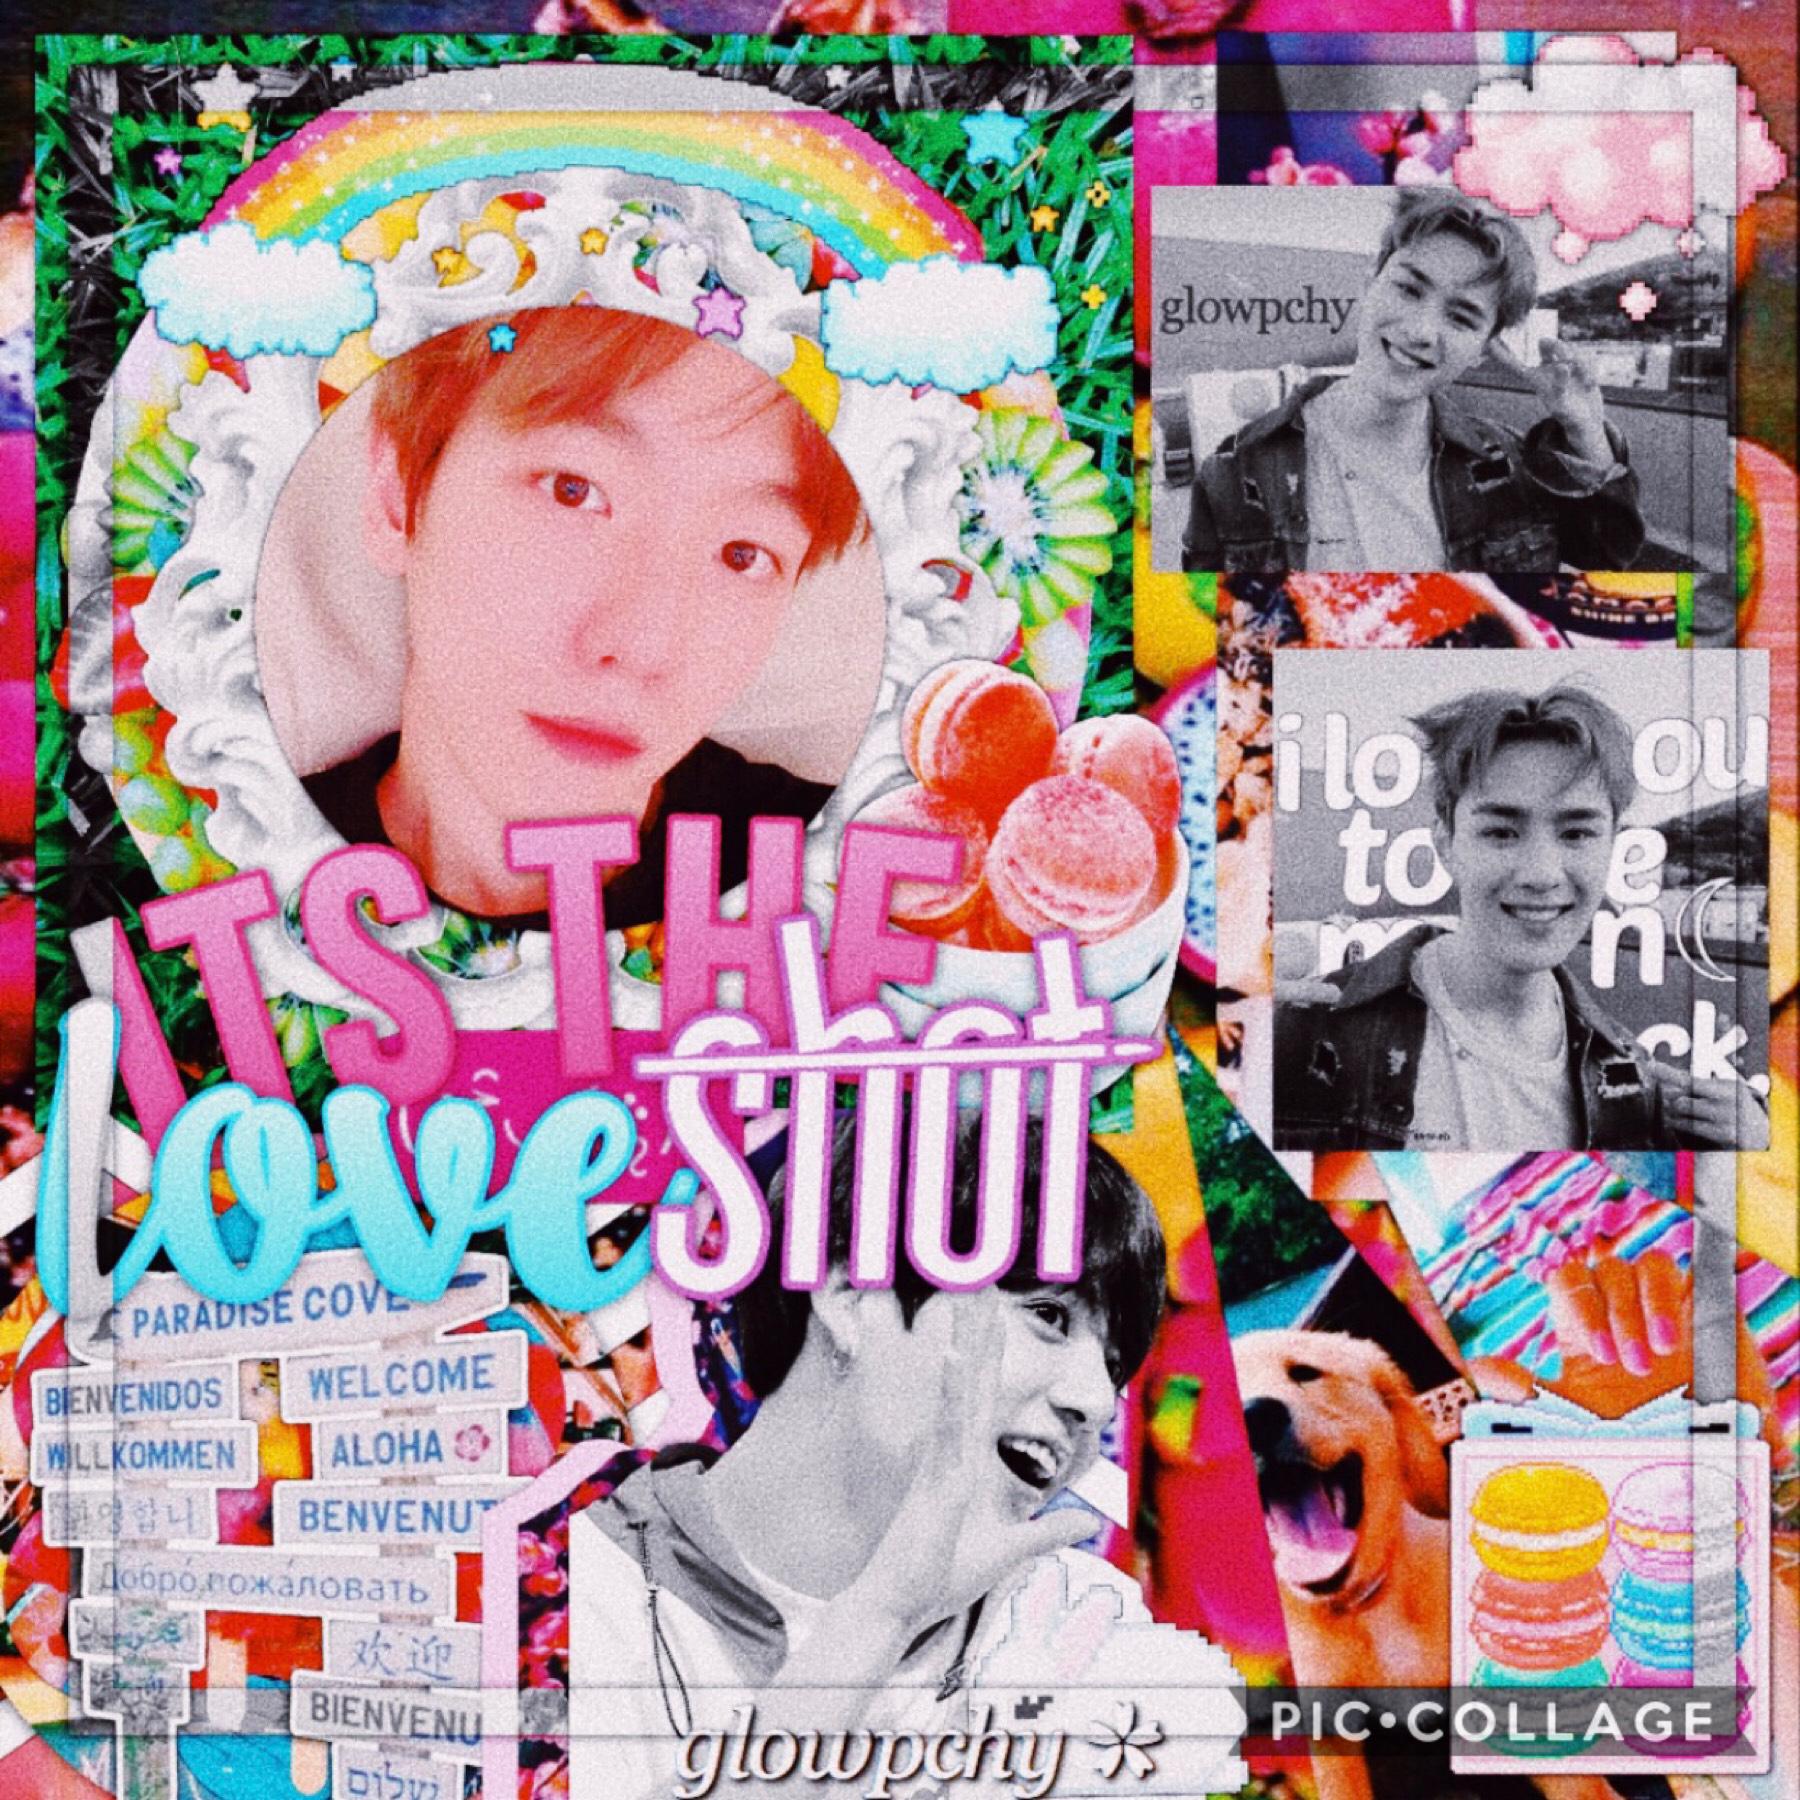 tap
heyy!! I totally forgot about this account, hope u like this edit 💗💗
q: favourite color?
a: red